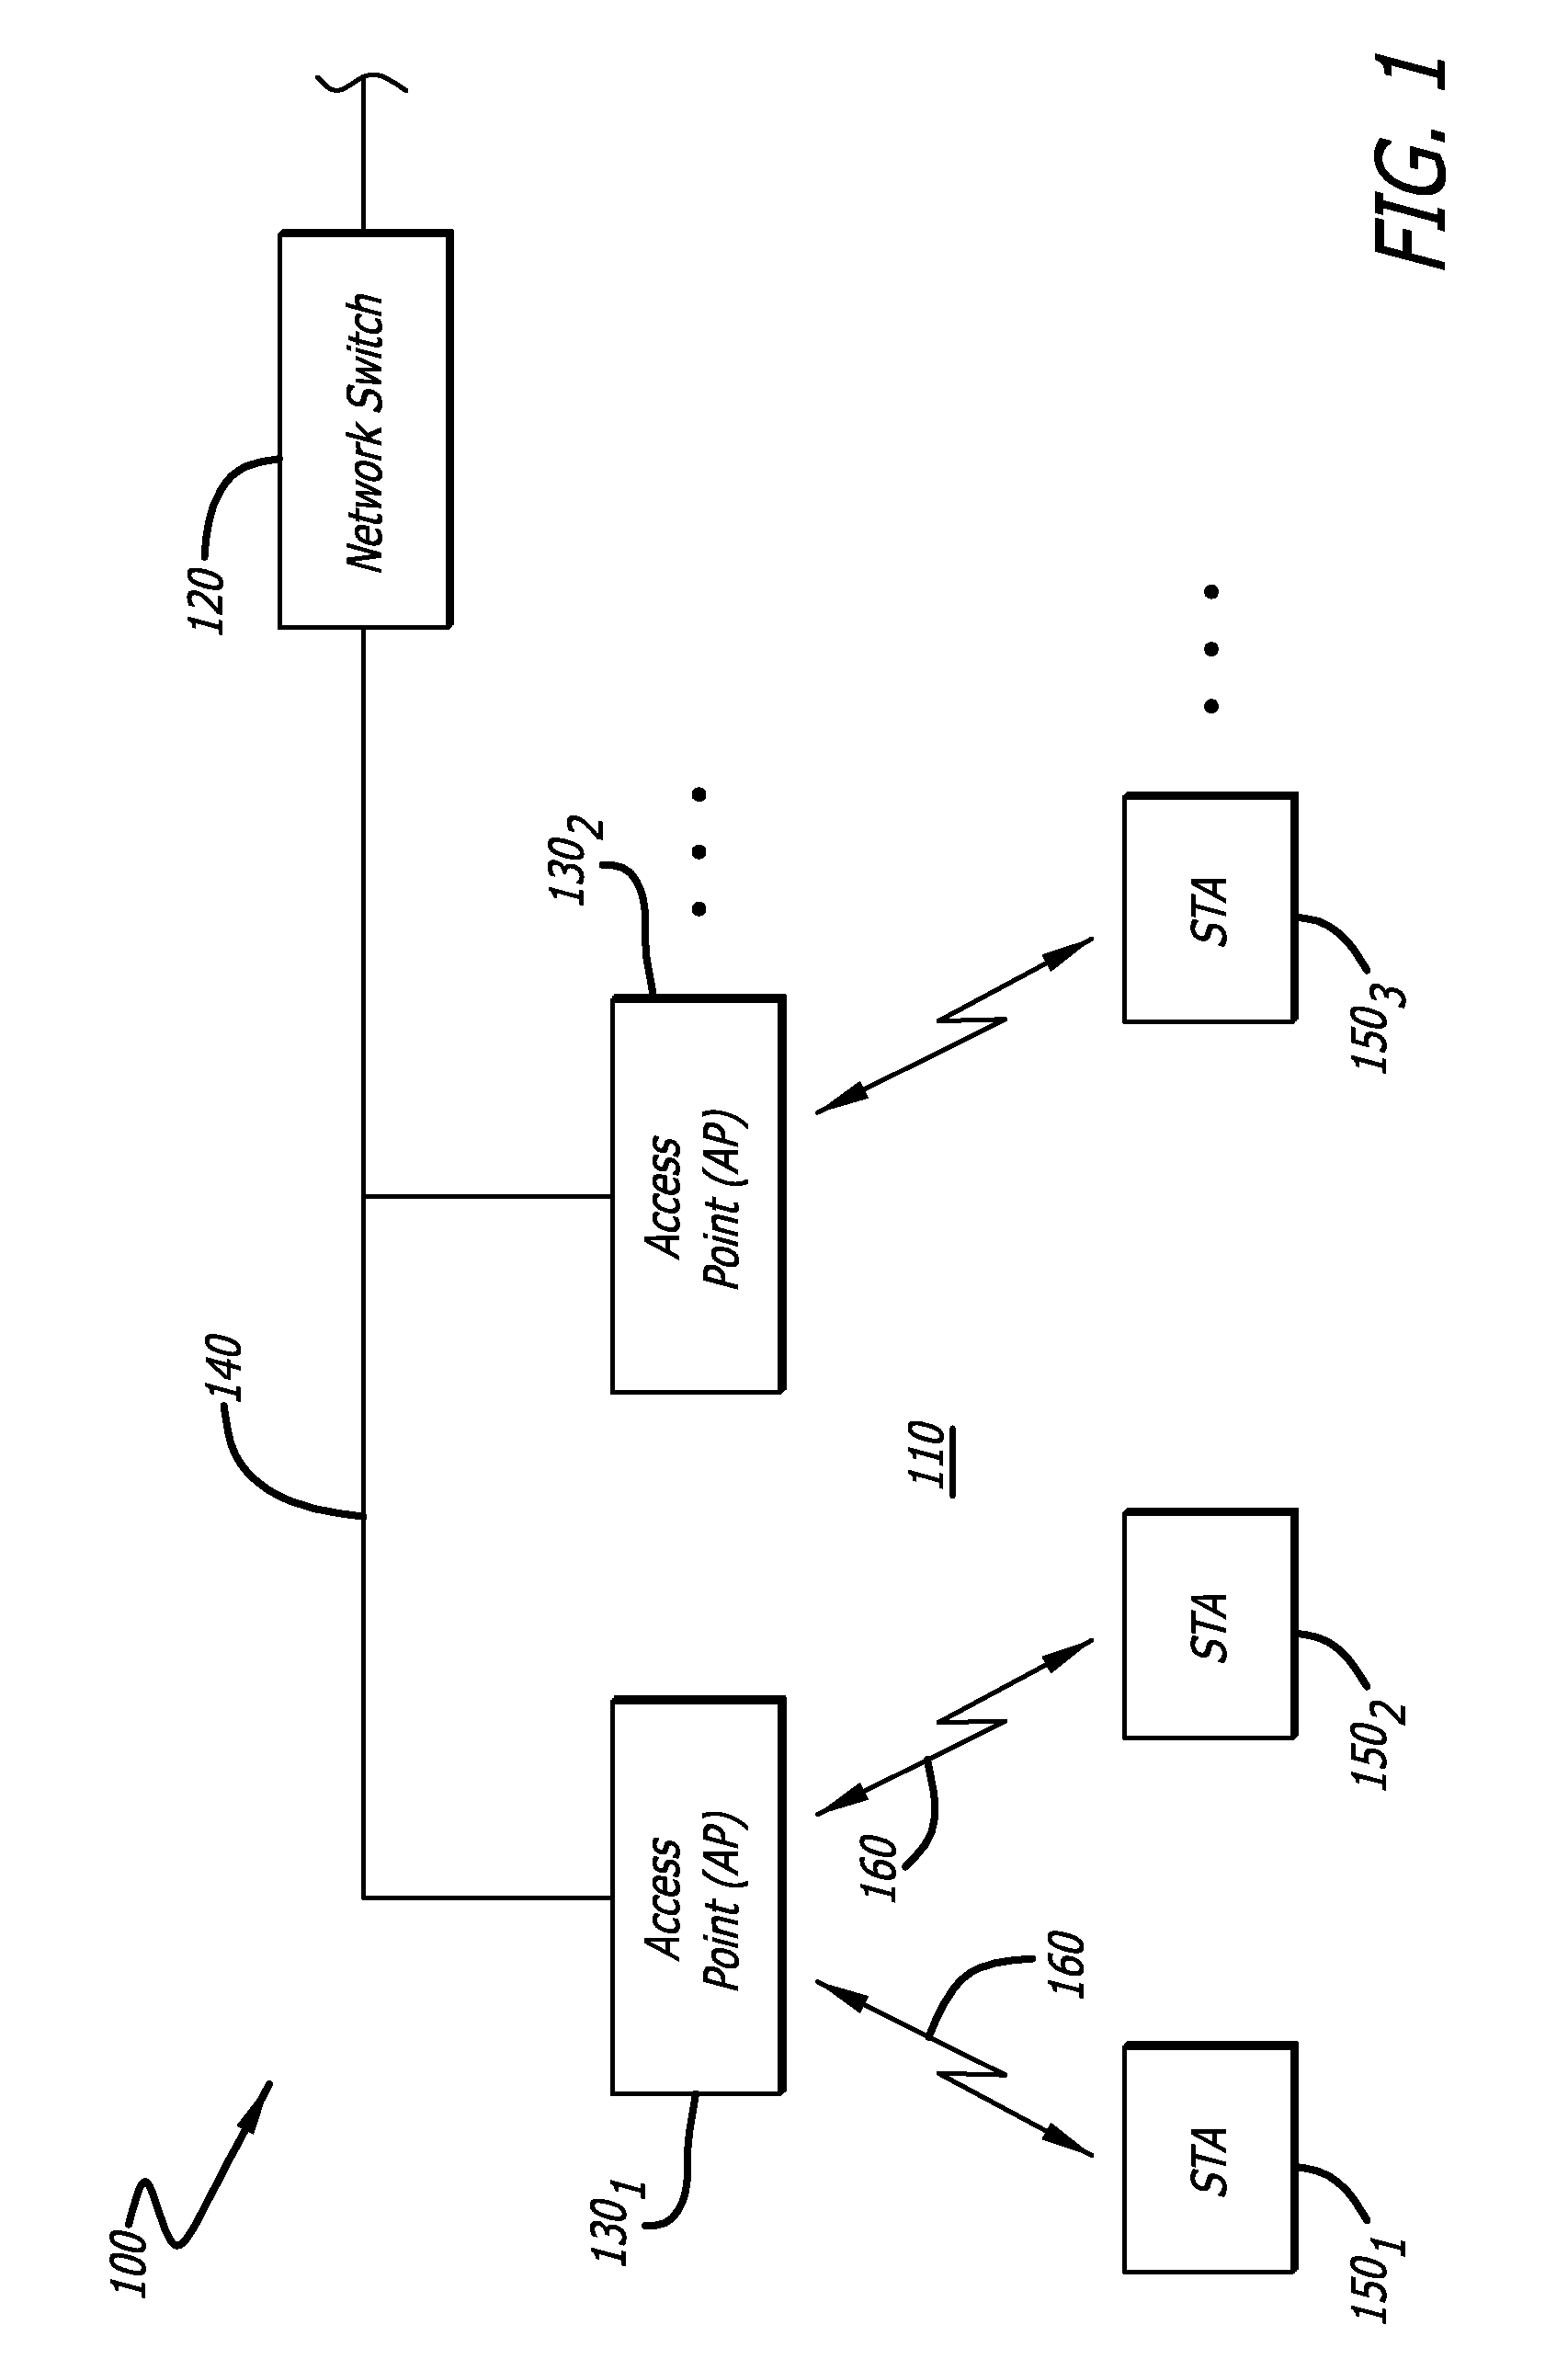 Heat dissipation unit for a wireless network device